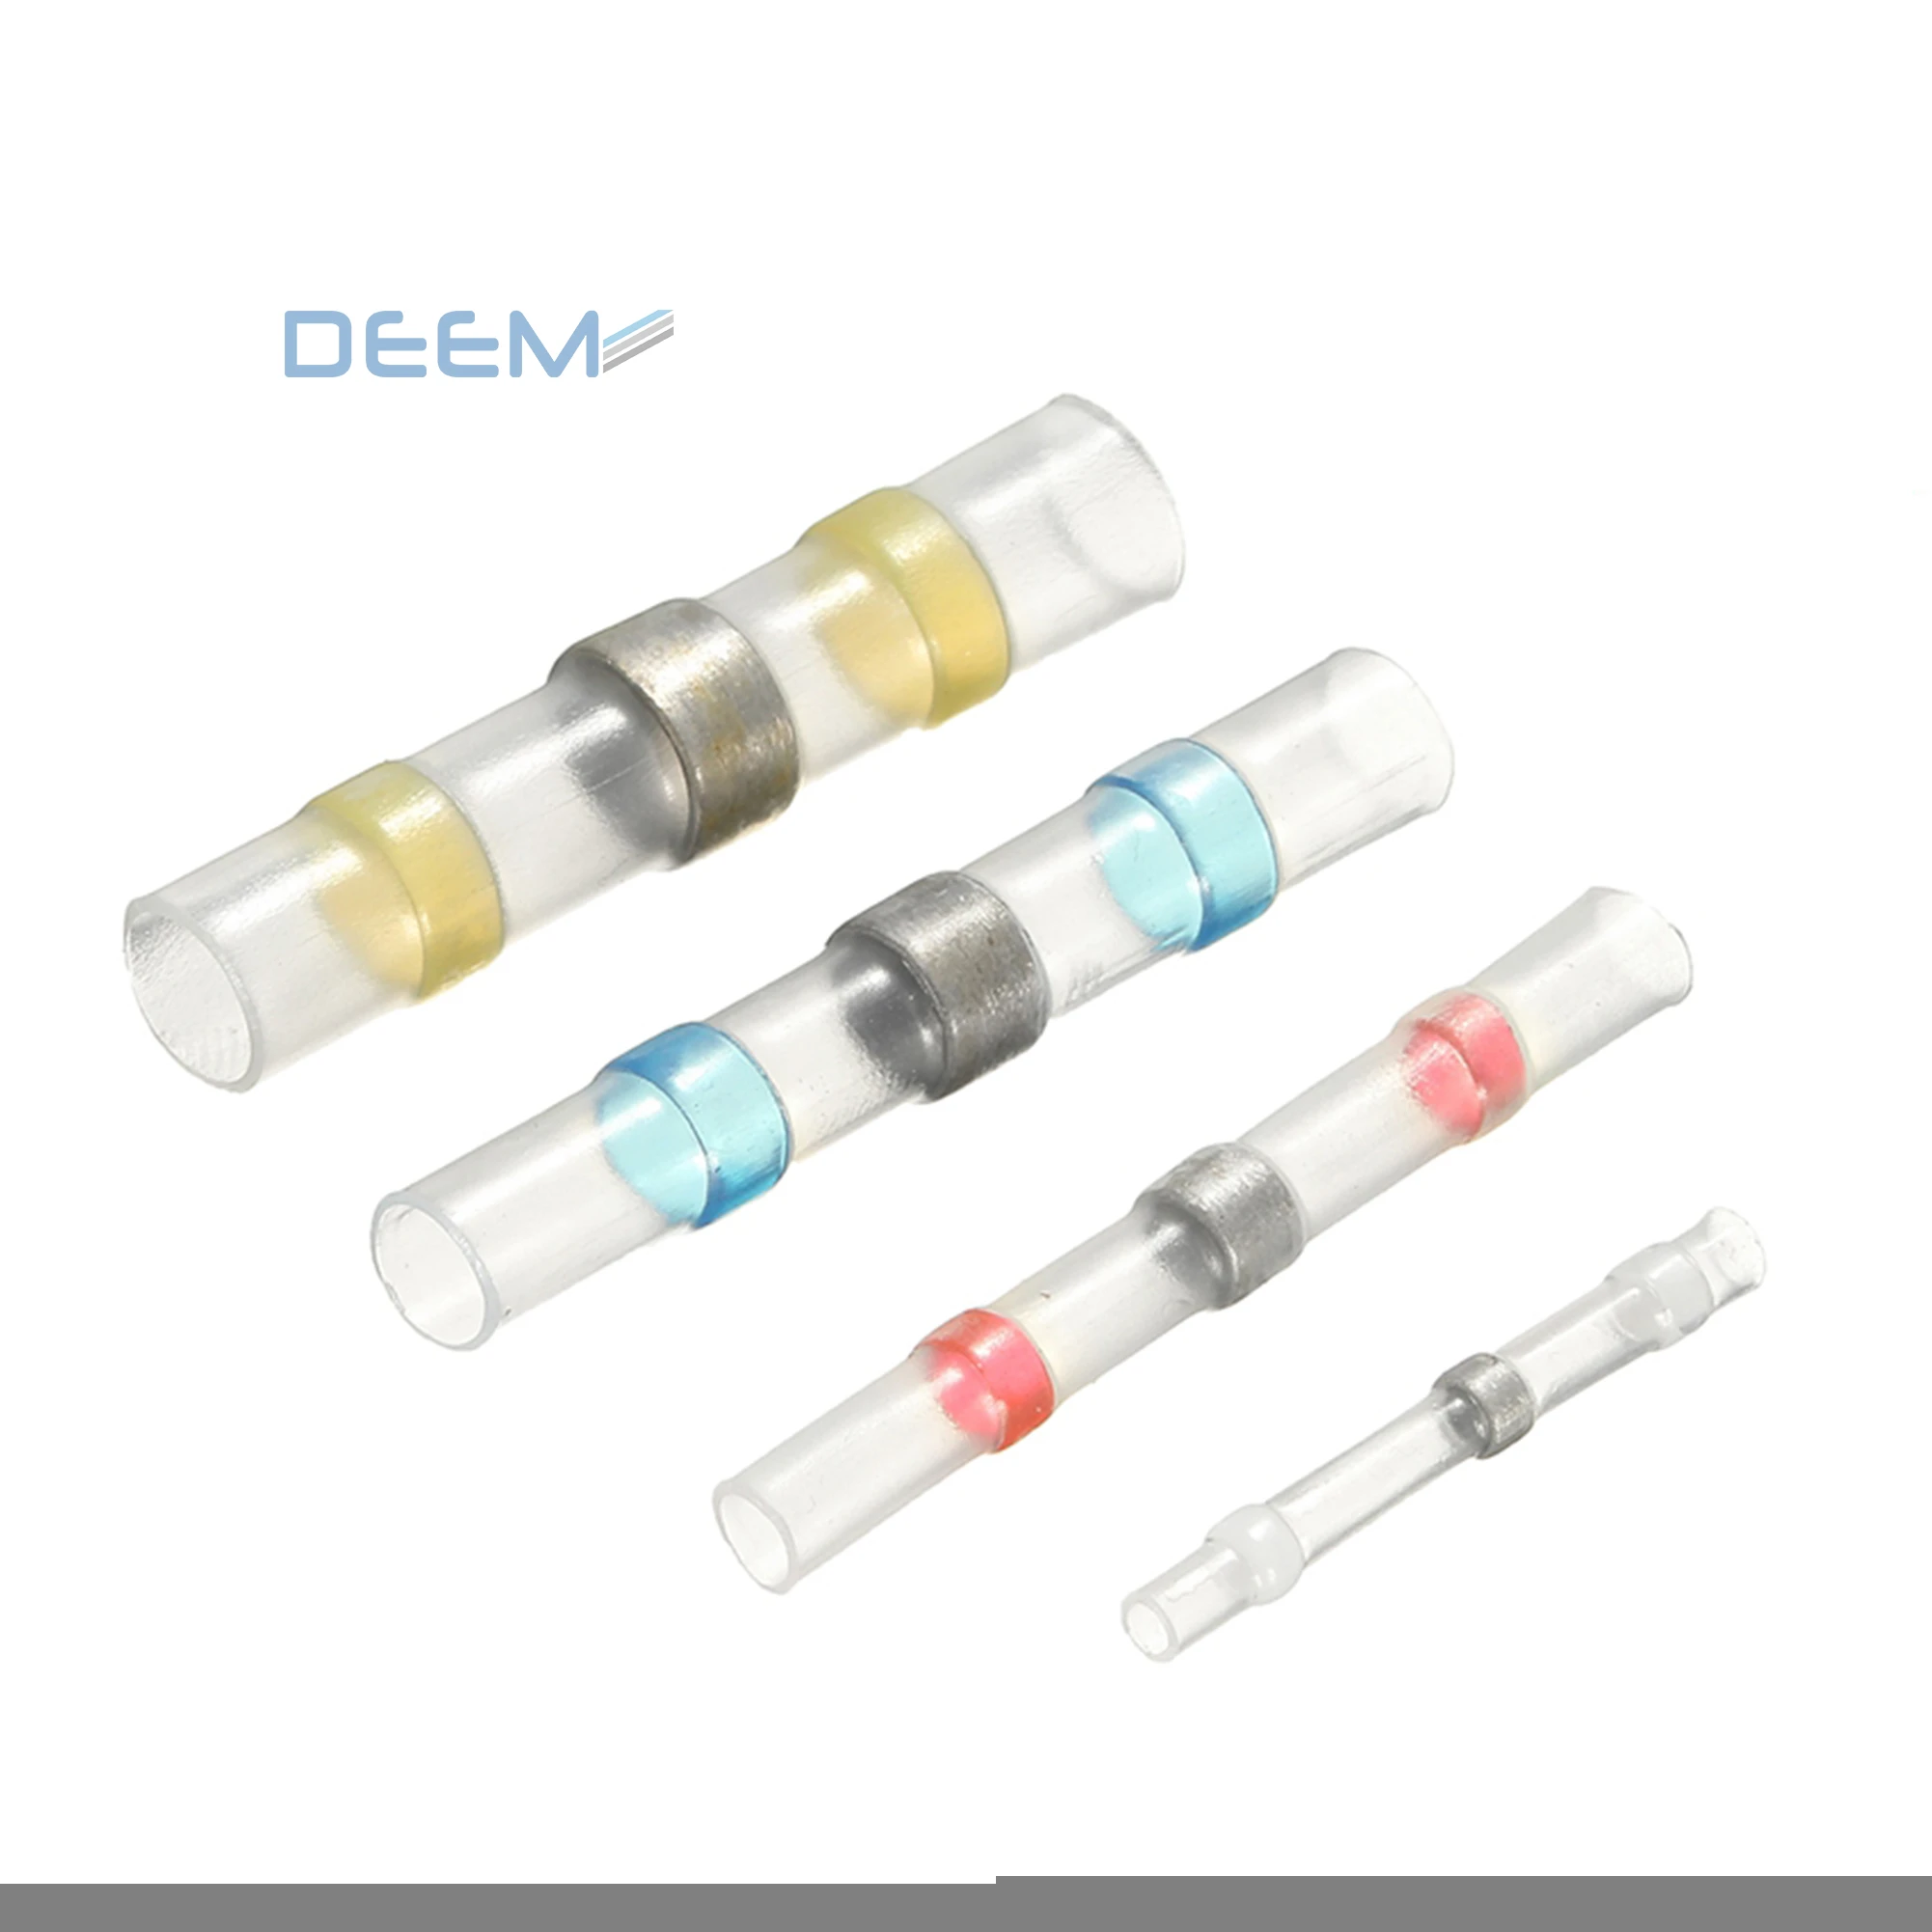 DEEM Free sample and Polyolefin waterproof heat shrink solder sleeve wire splices connector for wire insulation and connection